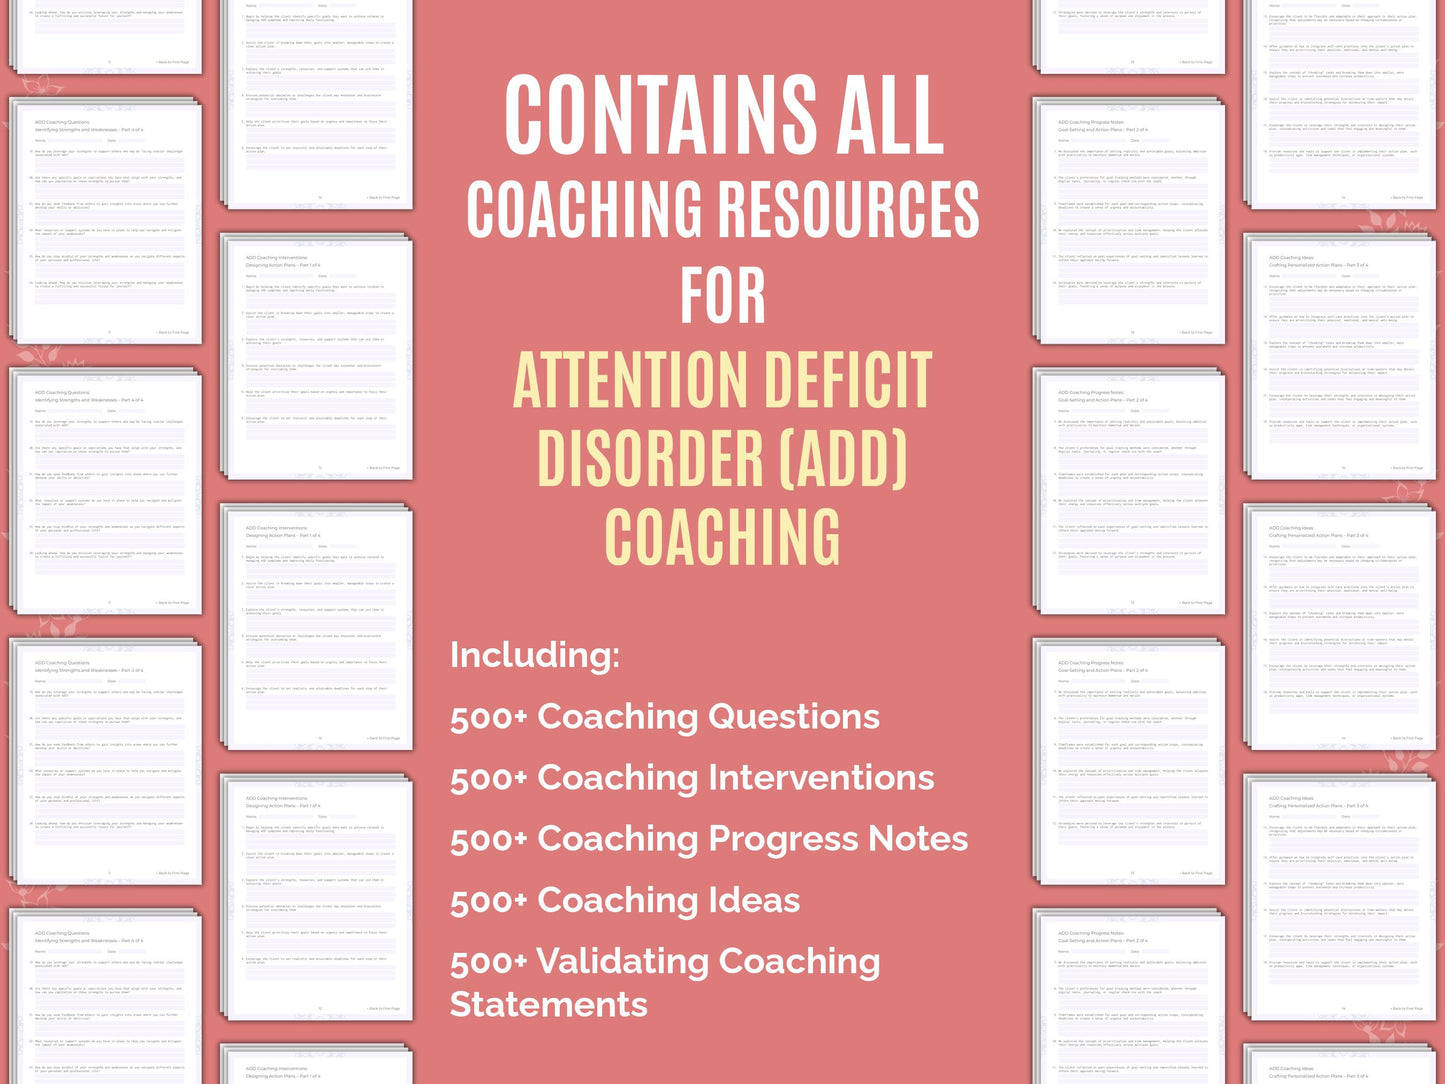 Coaching Interventions Resource